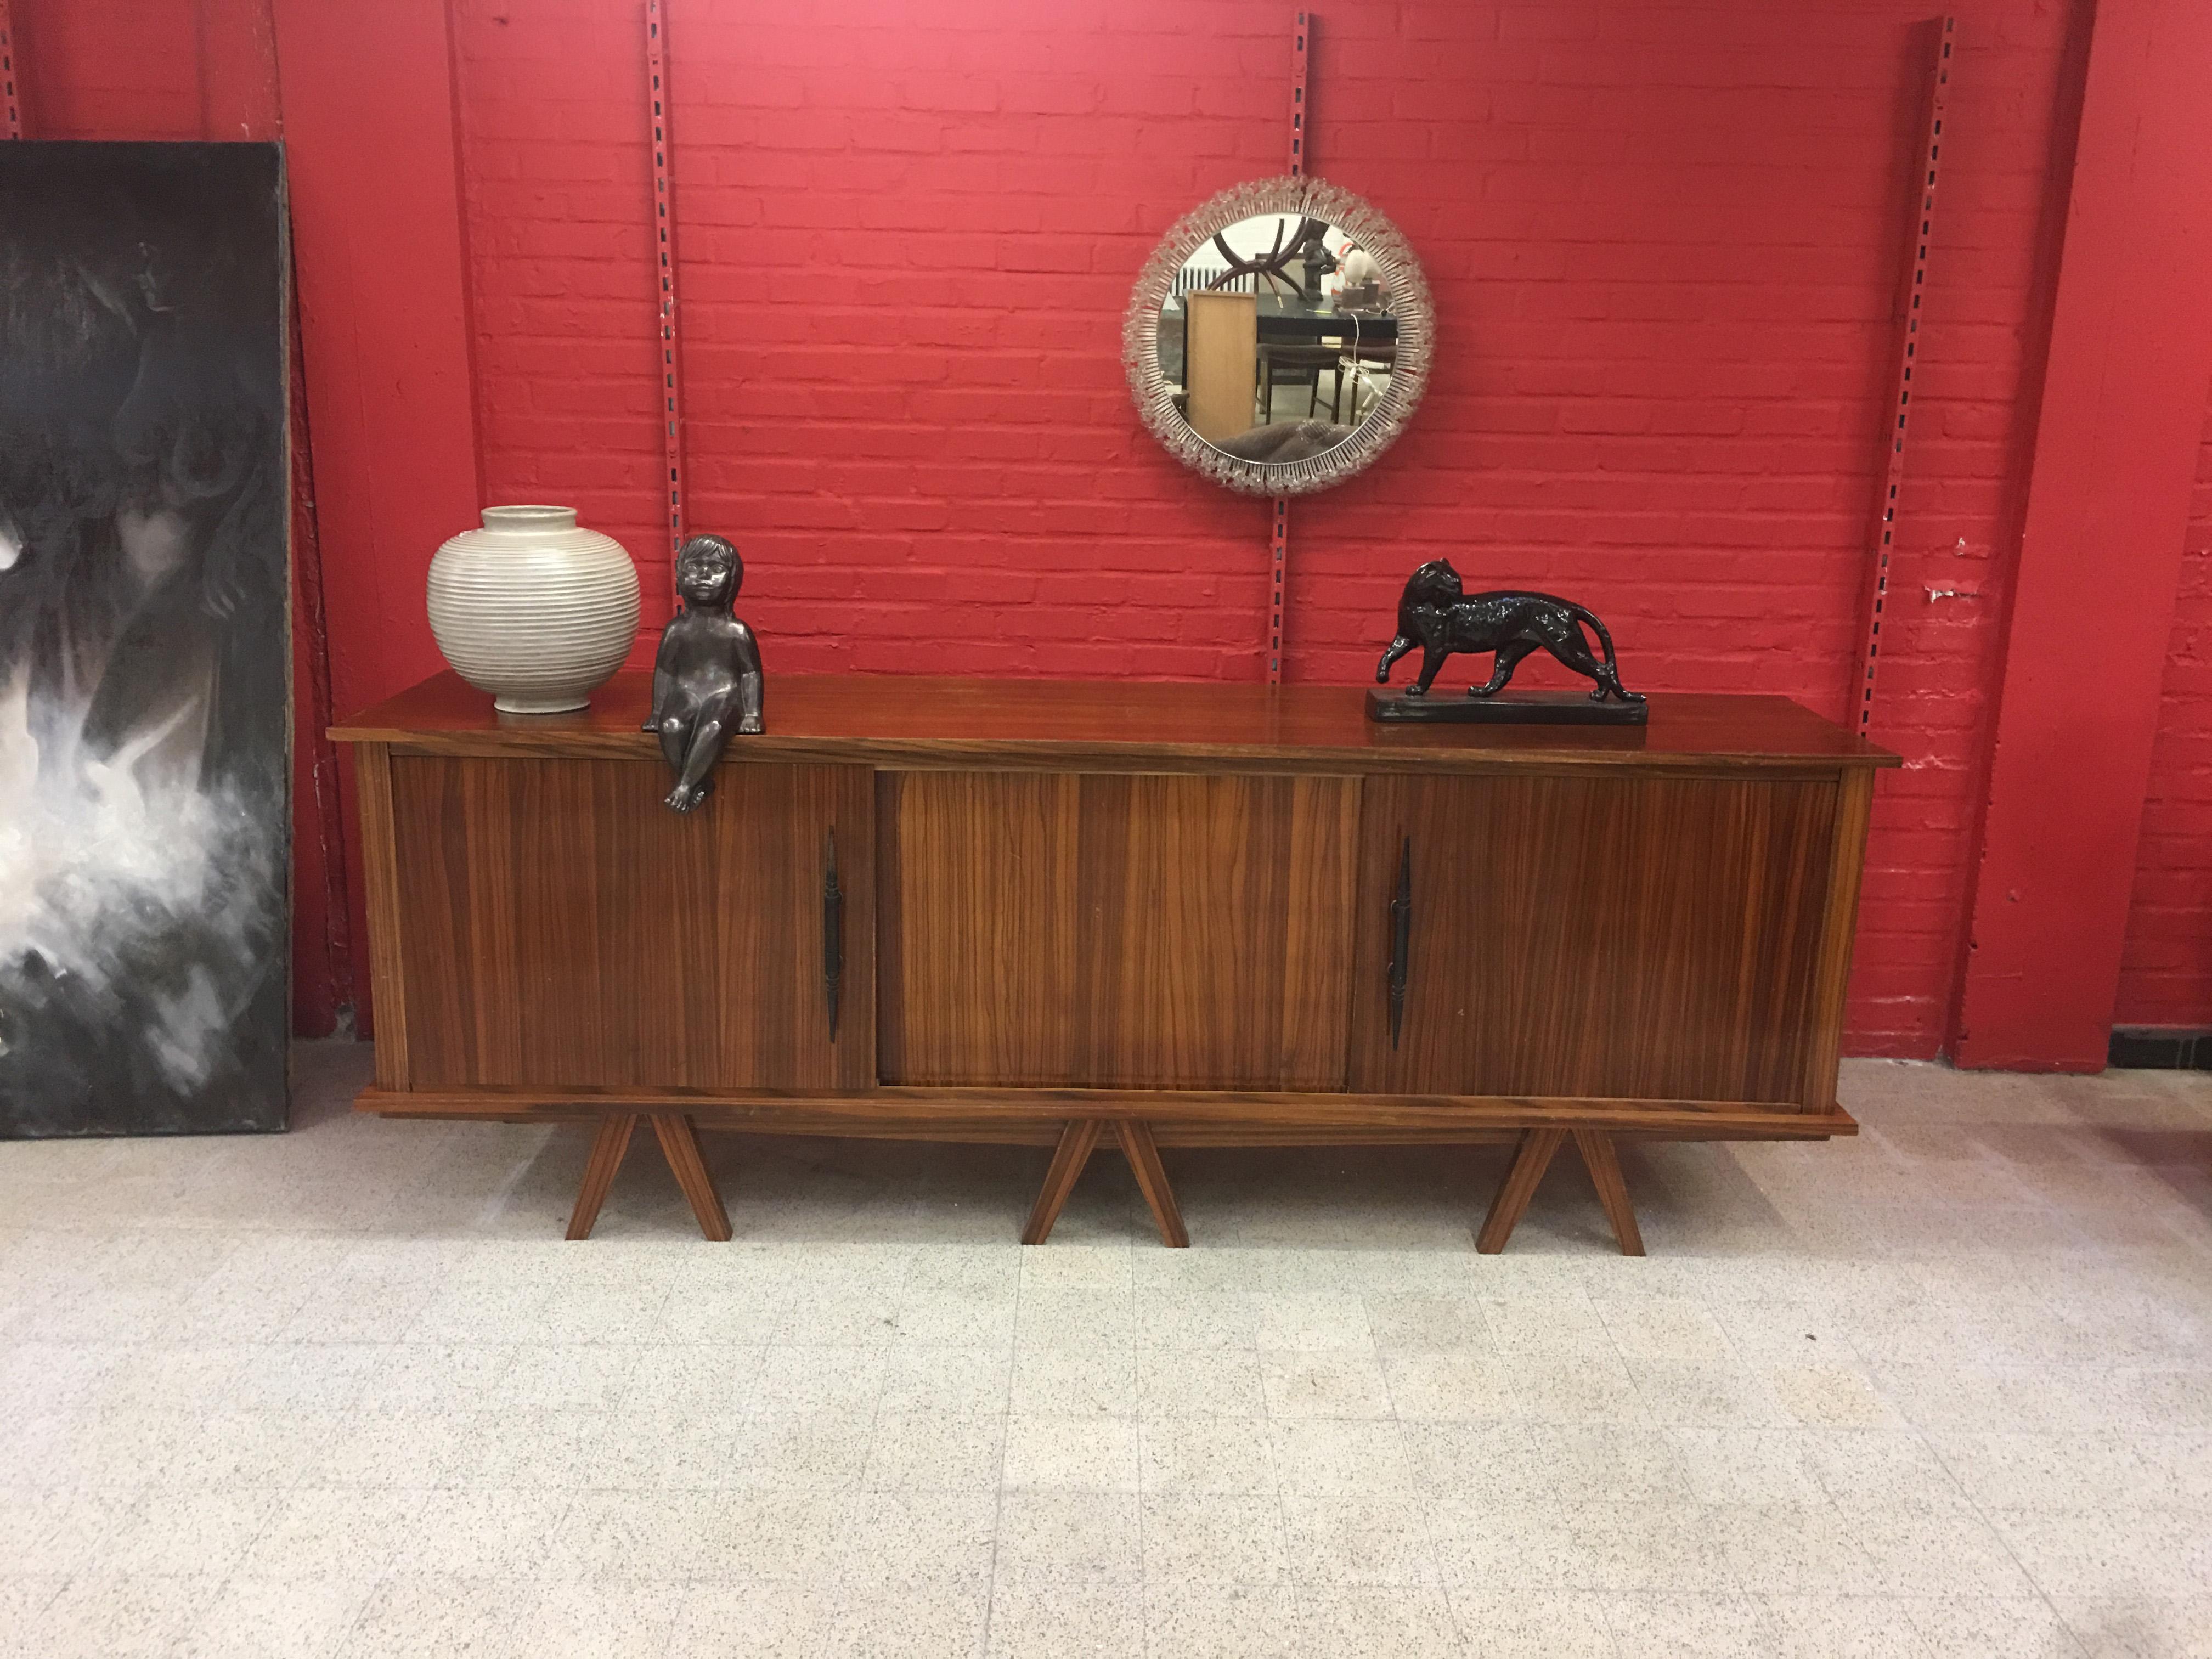  Zebra Wood and wrought iron brutalist Sideboard circa 1950
wrought iron handles.